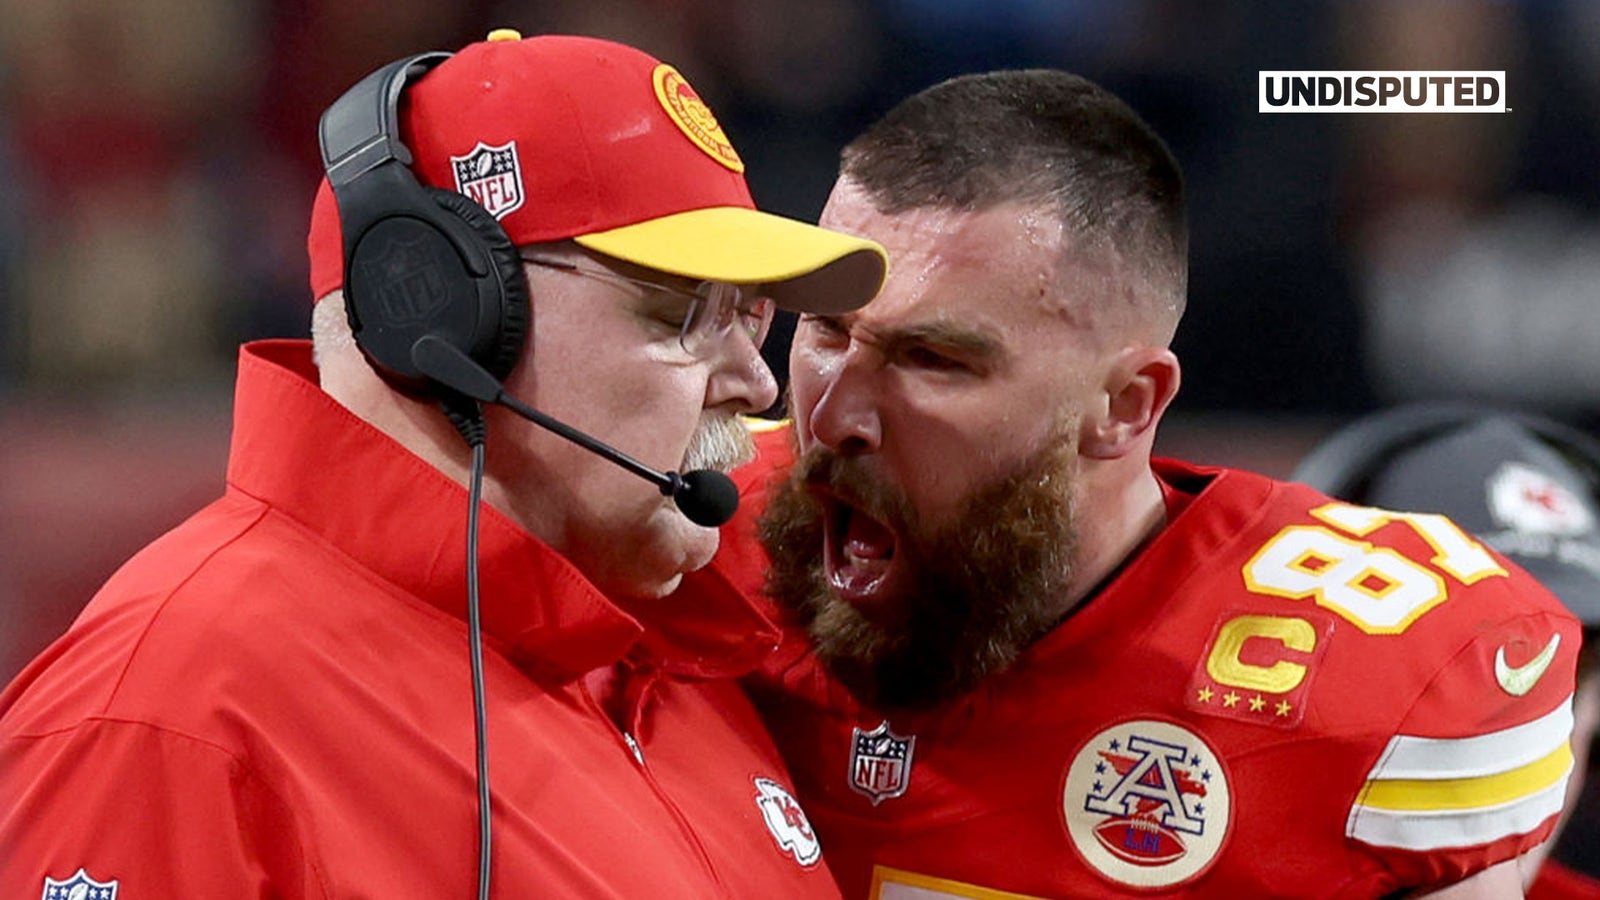 Travis Kelce yells and bumps into Andy Reid on sidelines after Chiefs fumble 